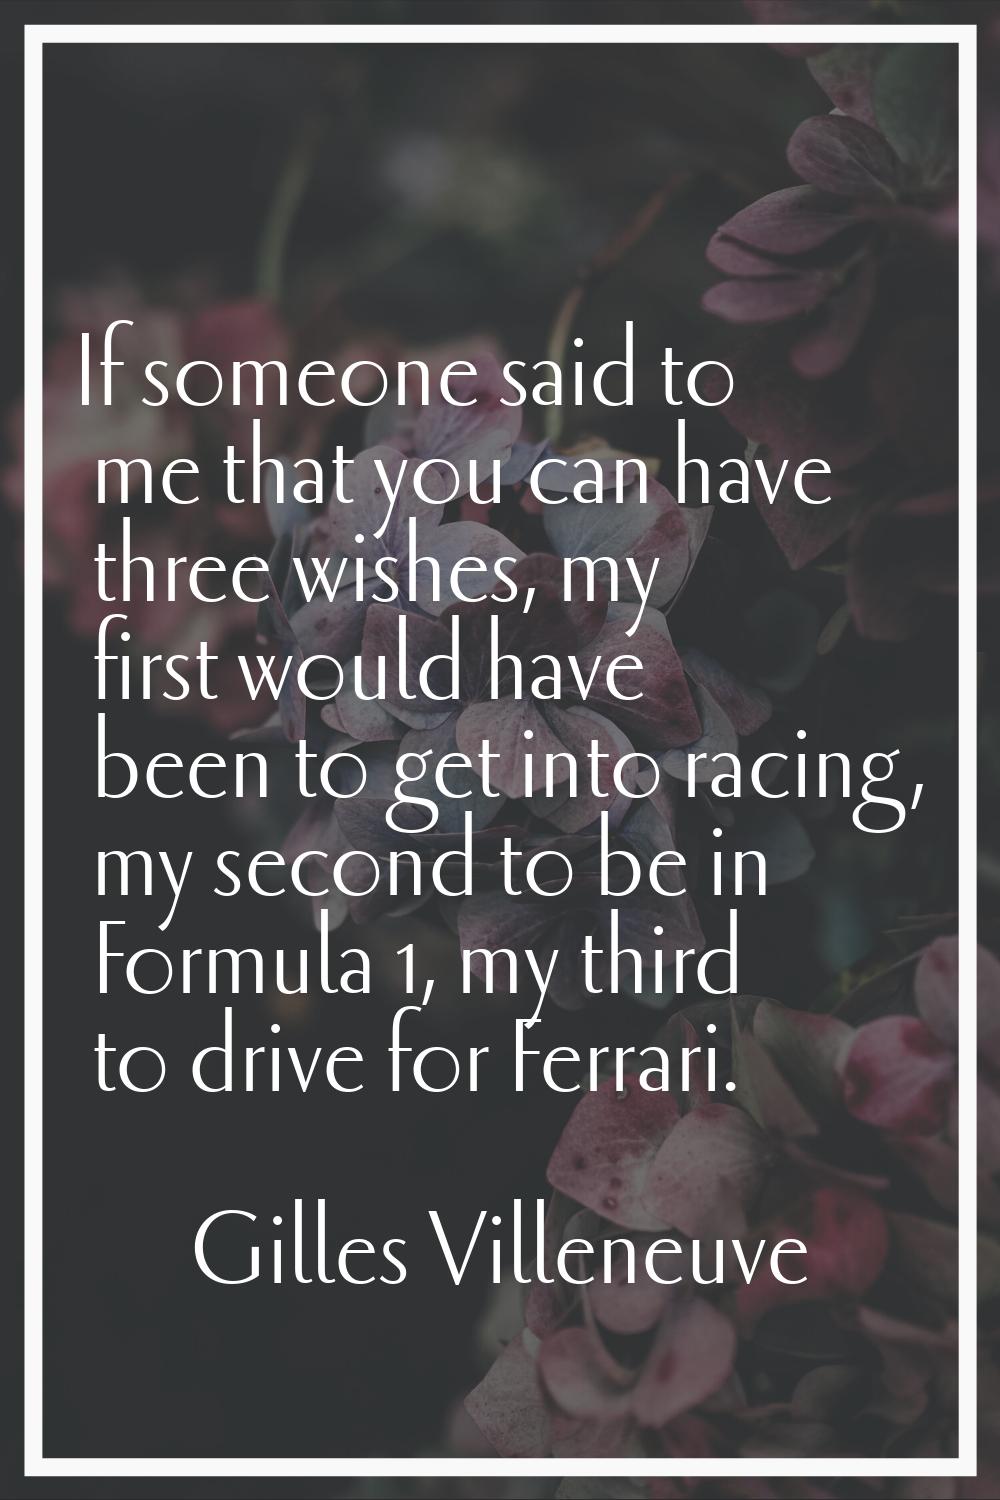 If someone said to me that you can have three wishes, my first would have been to get into racing, 